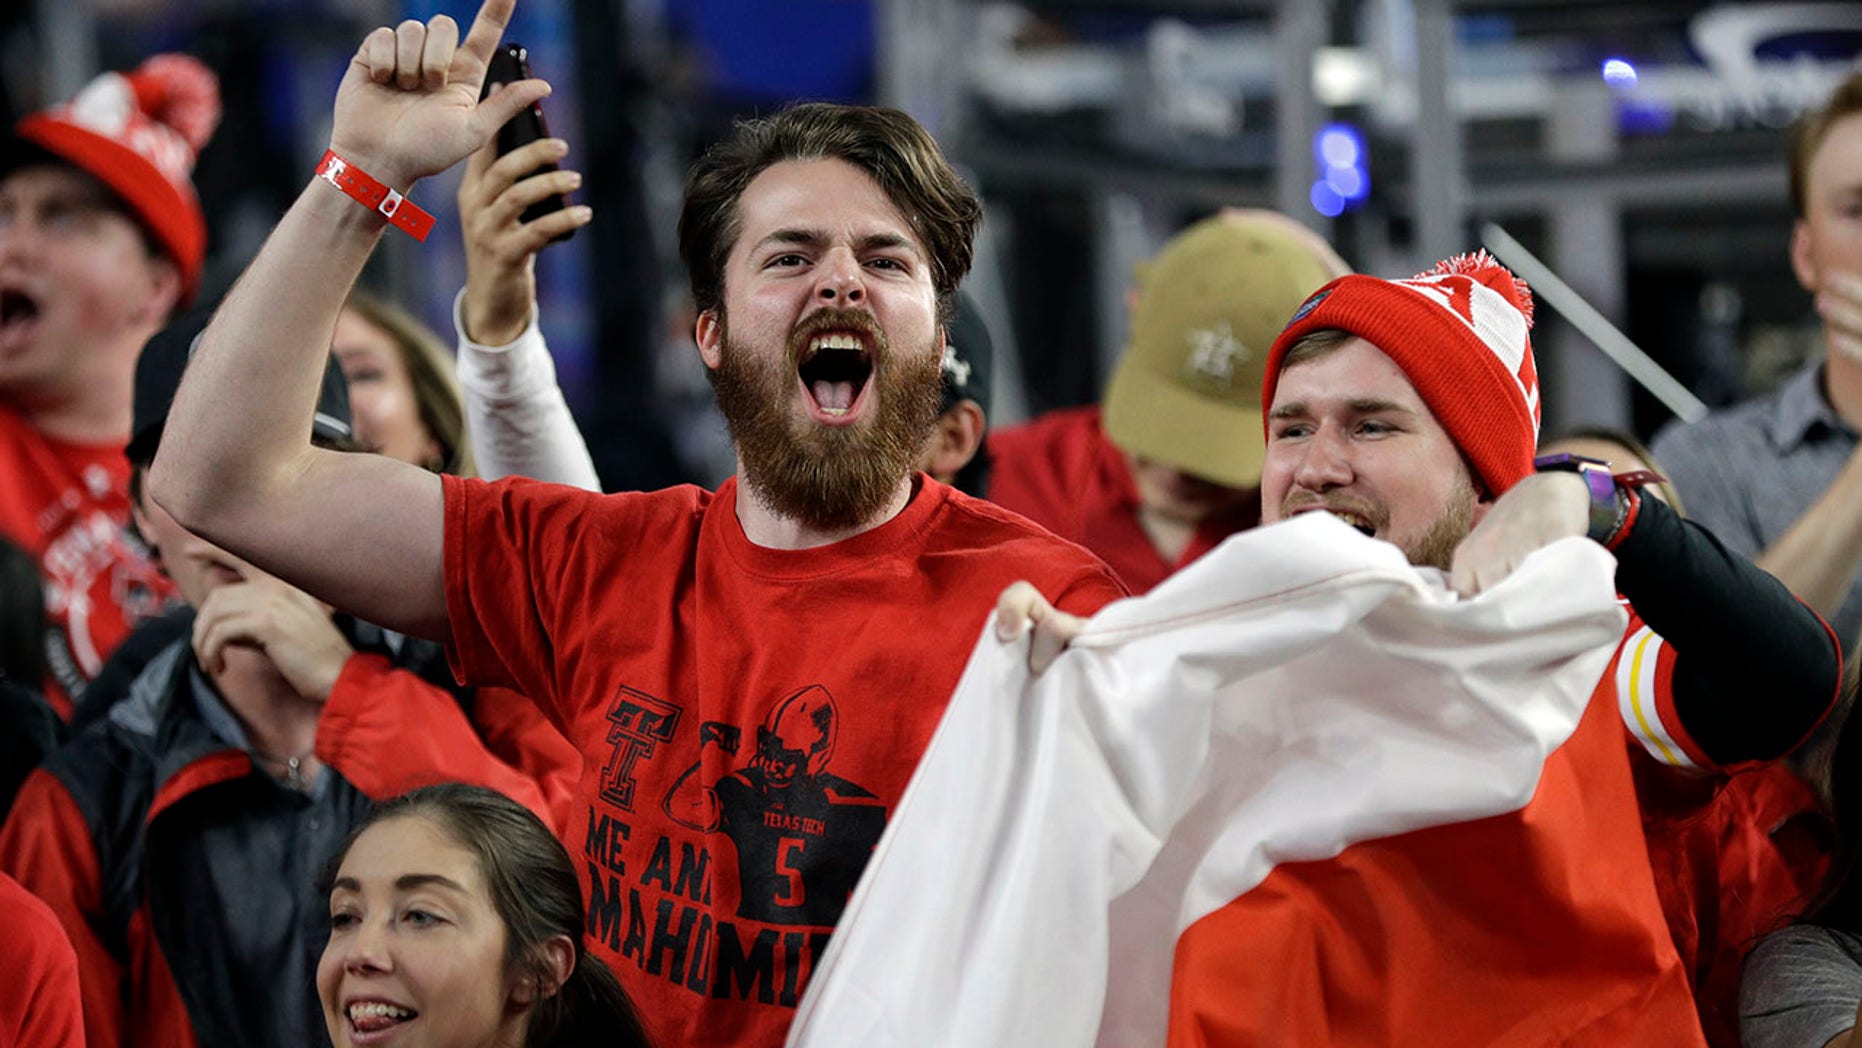 Texas Tech fans cheer before the semifinals of the Final Four NCAA college basketball tournament against Michigan State, Saturday, April 6, 2019, in Minneapolis. (Associated Press)